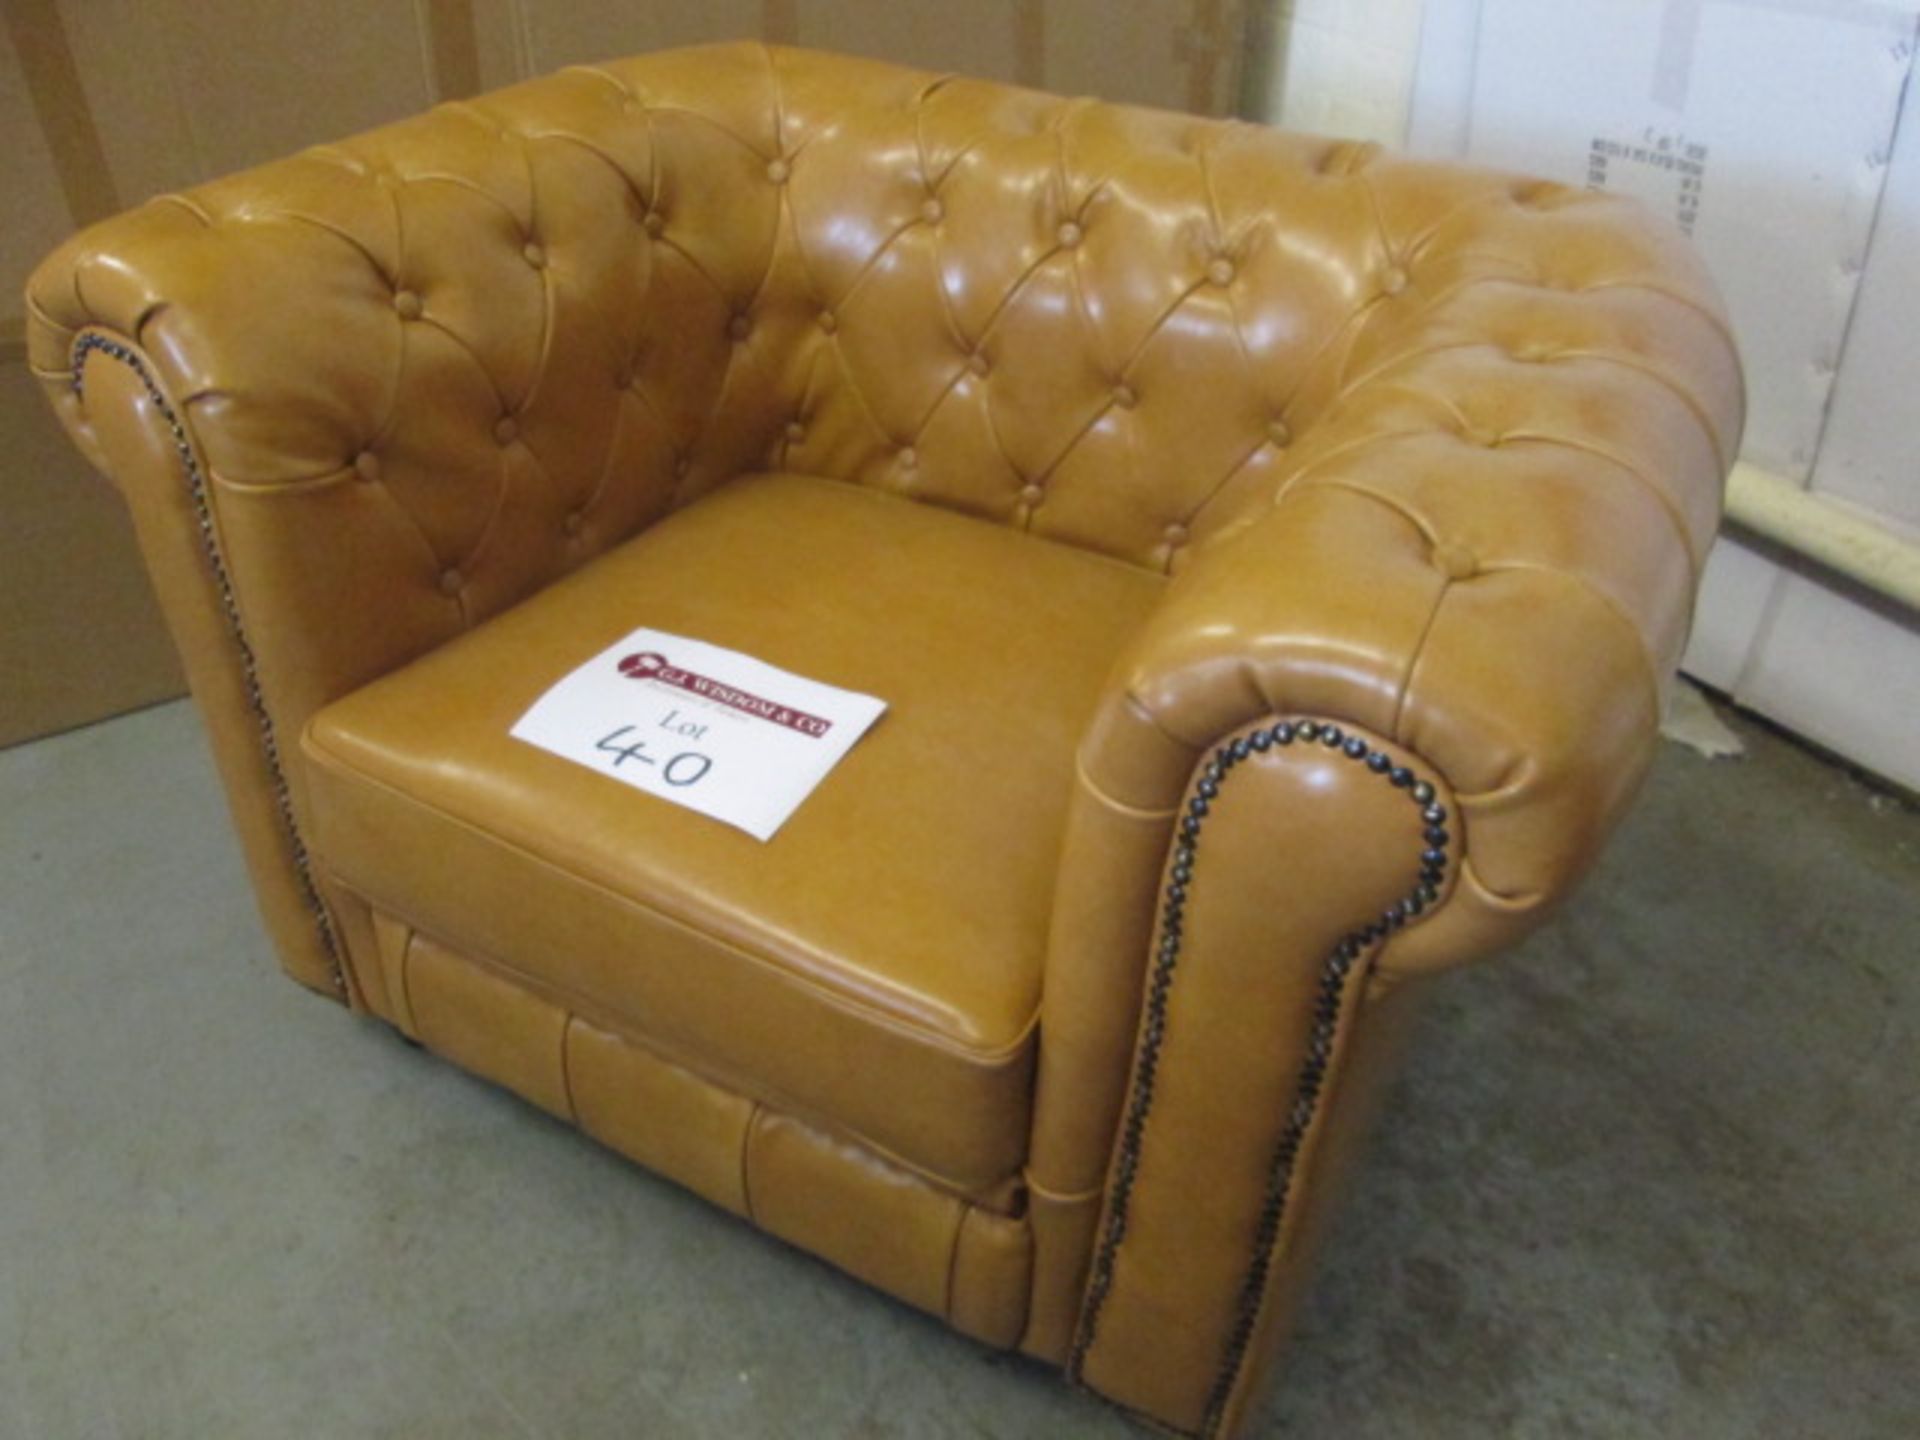 As New/Ex Display - Chesterfield Style Armchair in Tan Leather with Wooden Feet. - Image 2 of 3